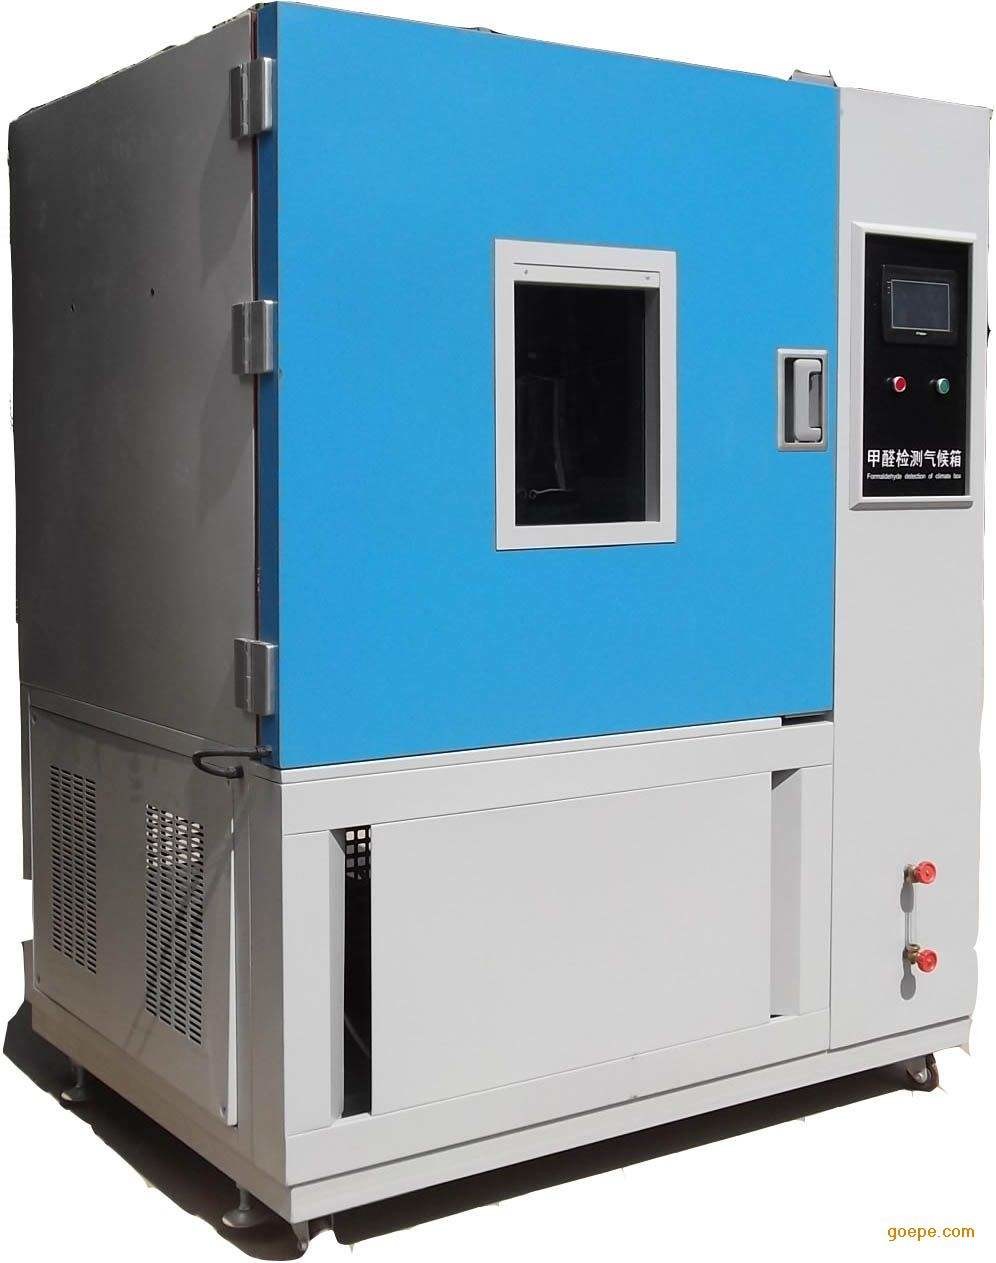 Quality 1 Cubic Meter VOC Release Environmental Chamber for Detecting the Variation of VOC Release in products for sale